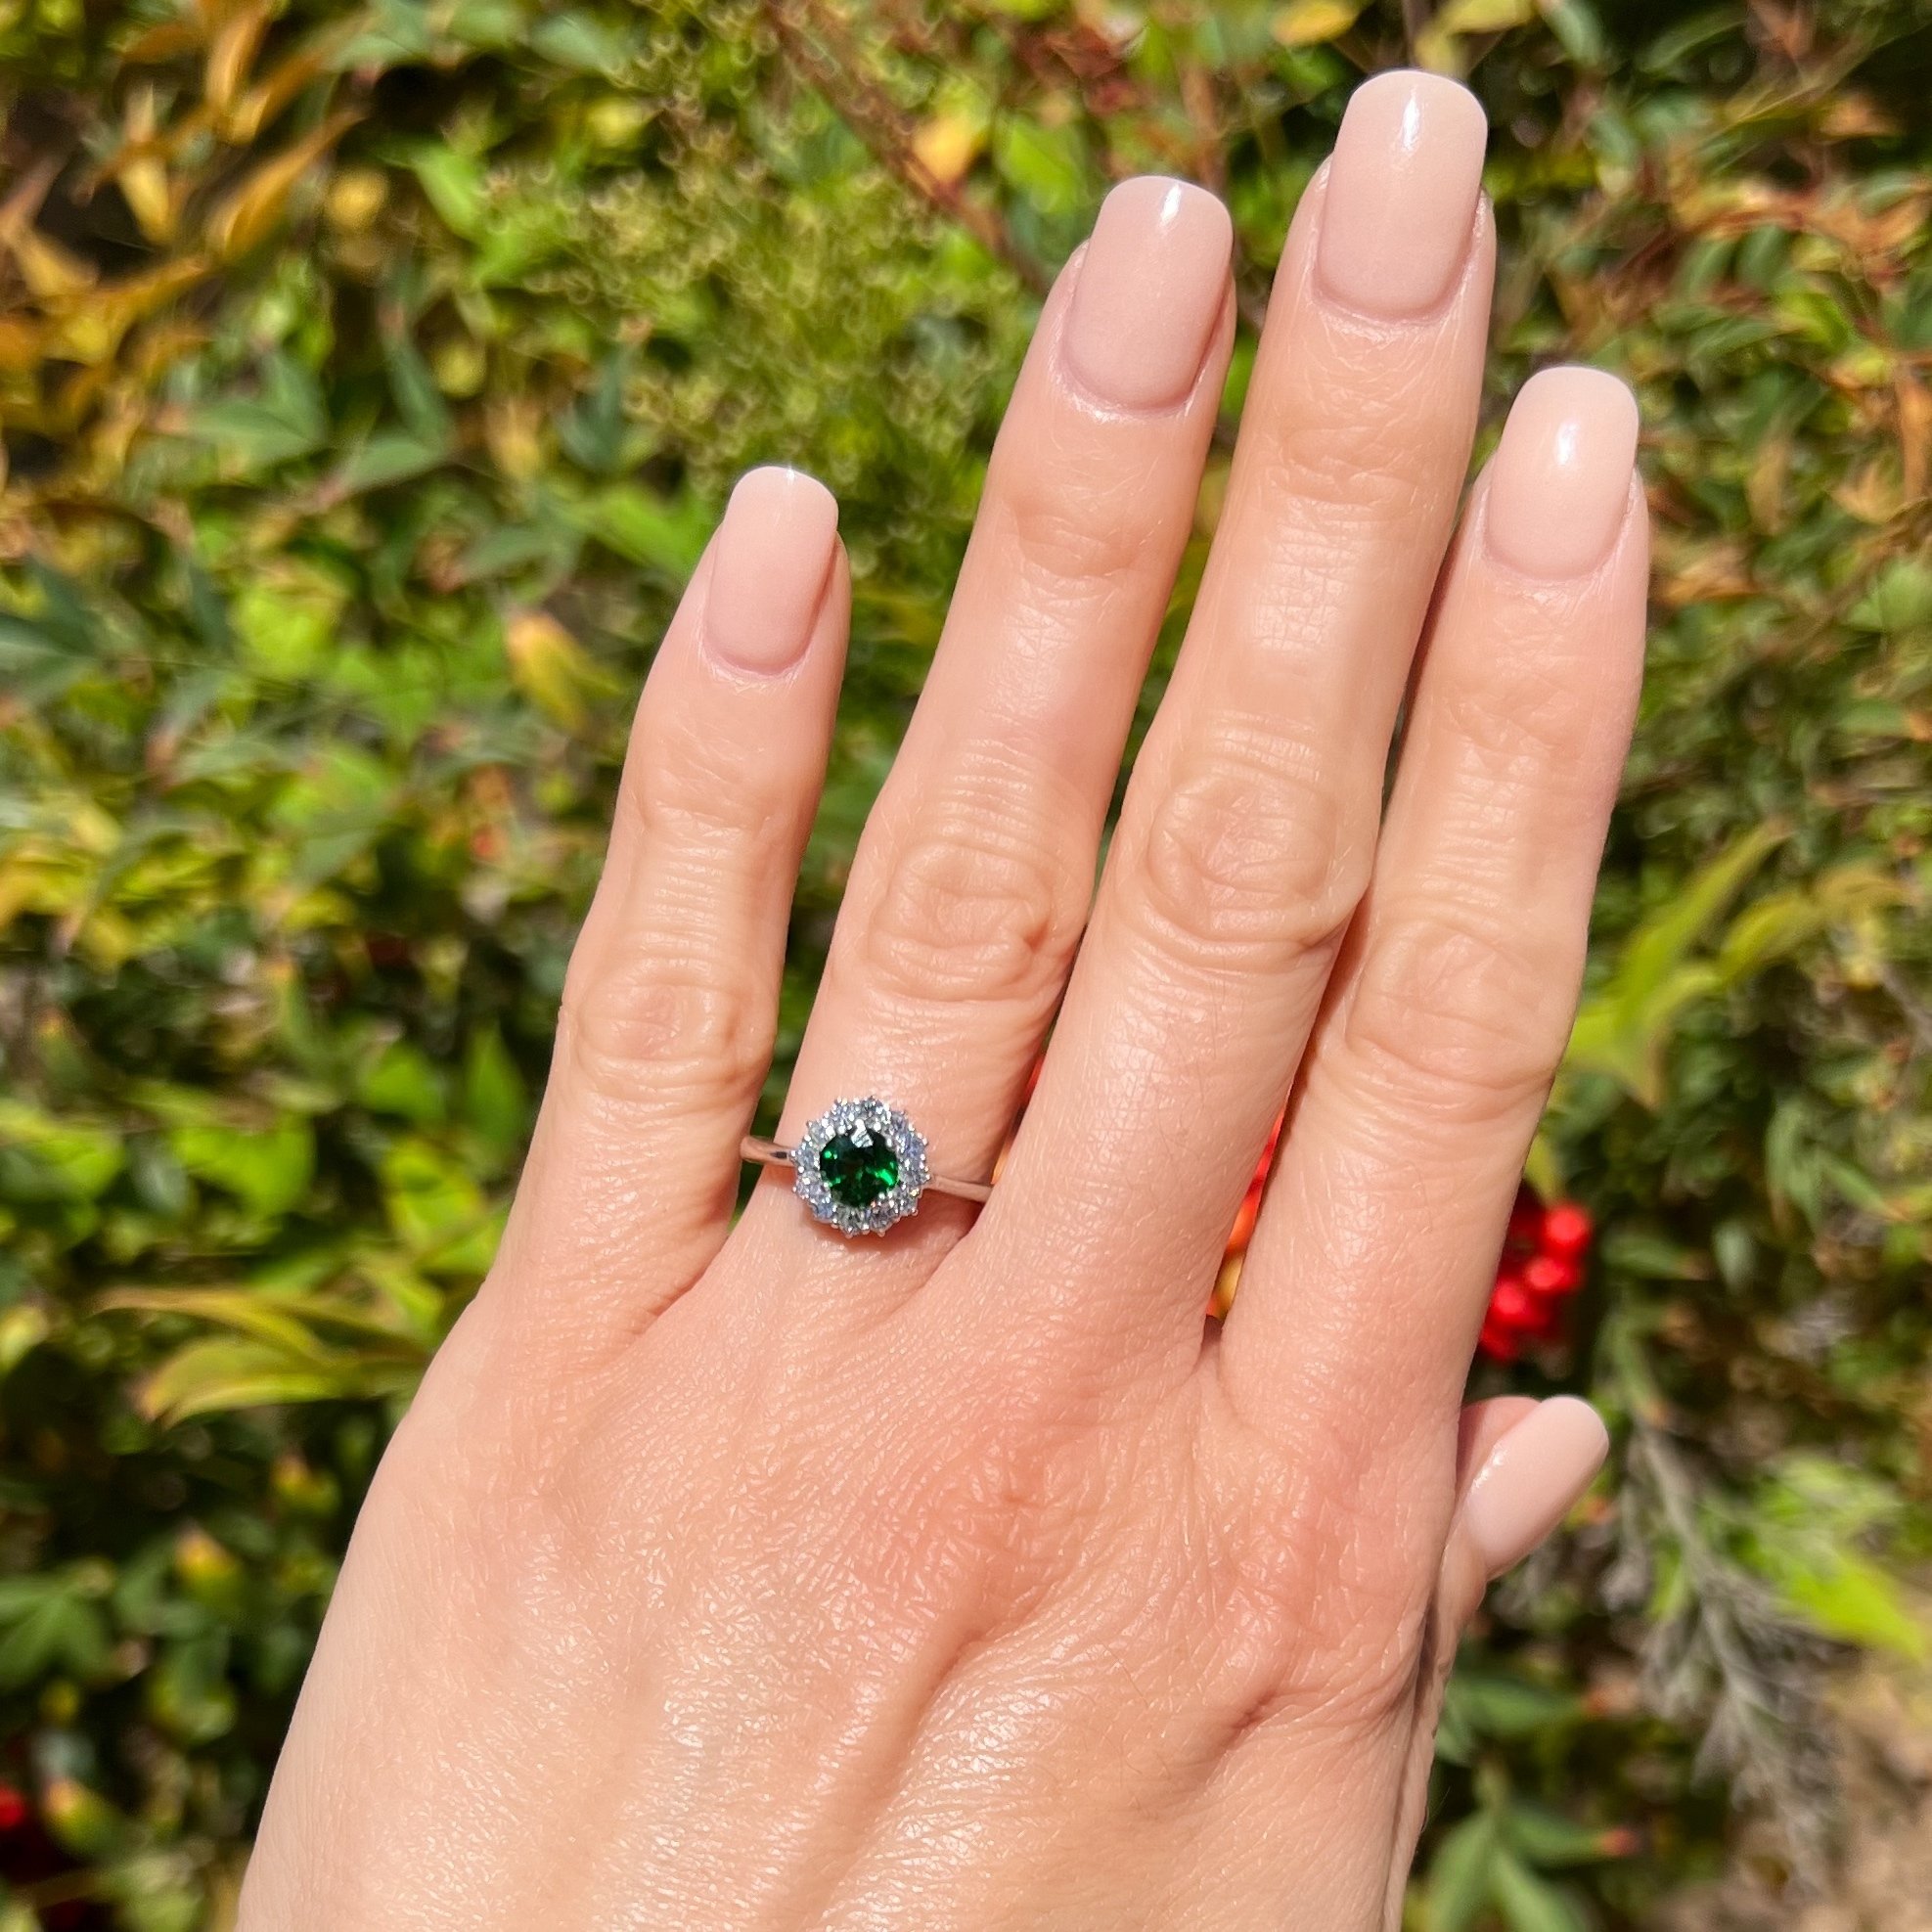 14ct White Gold and Pear Cut Alexandrite and Garnet Engagement Ring